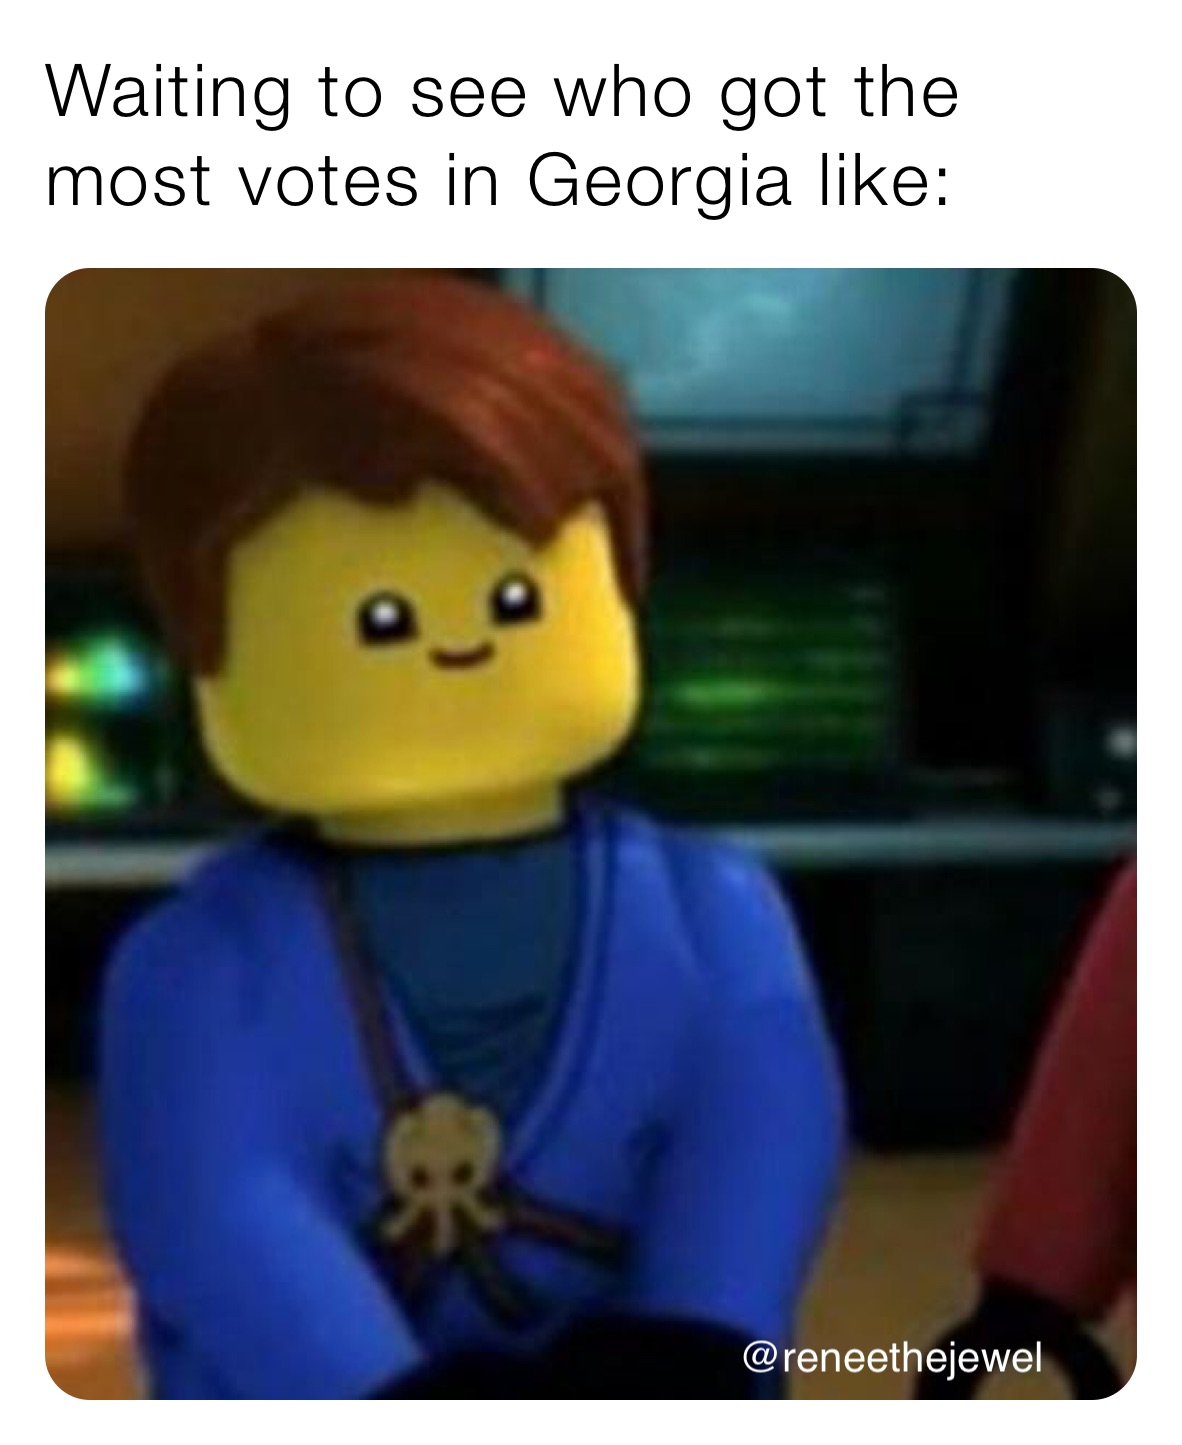 Waiting to see who got the most votes in Georgia like: